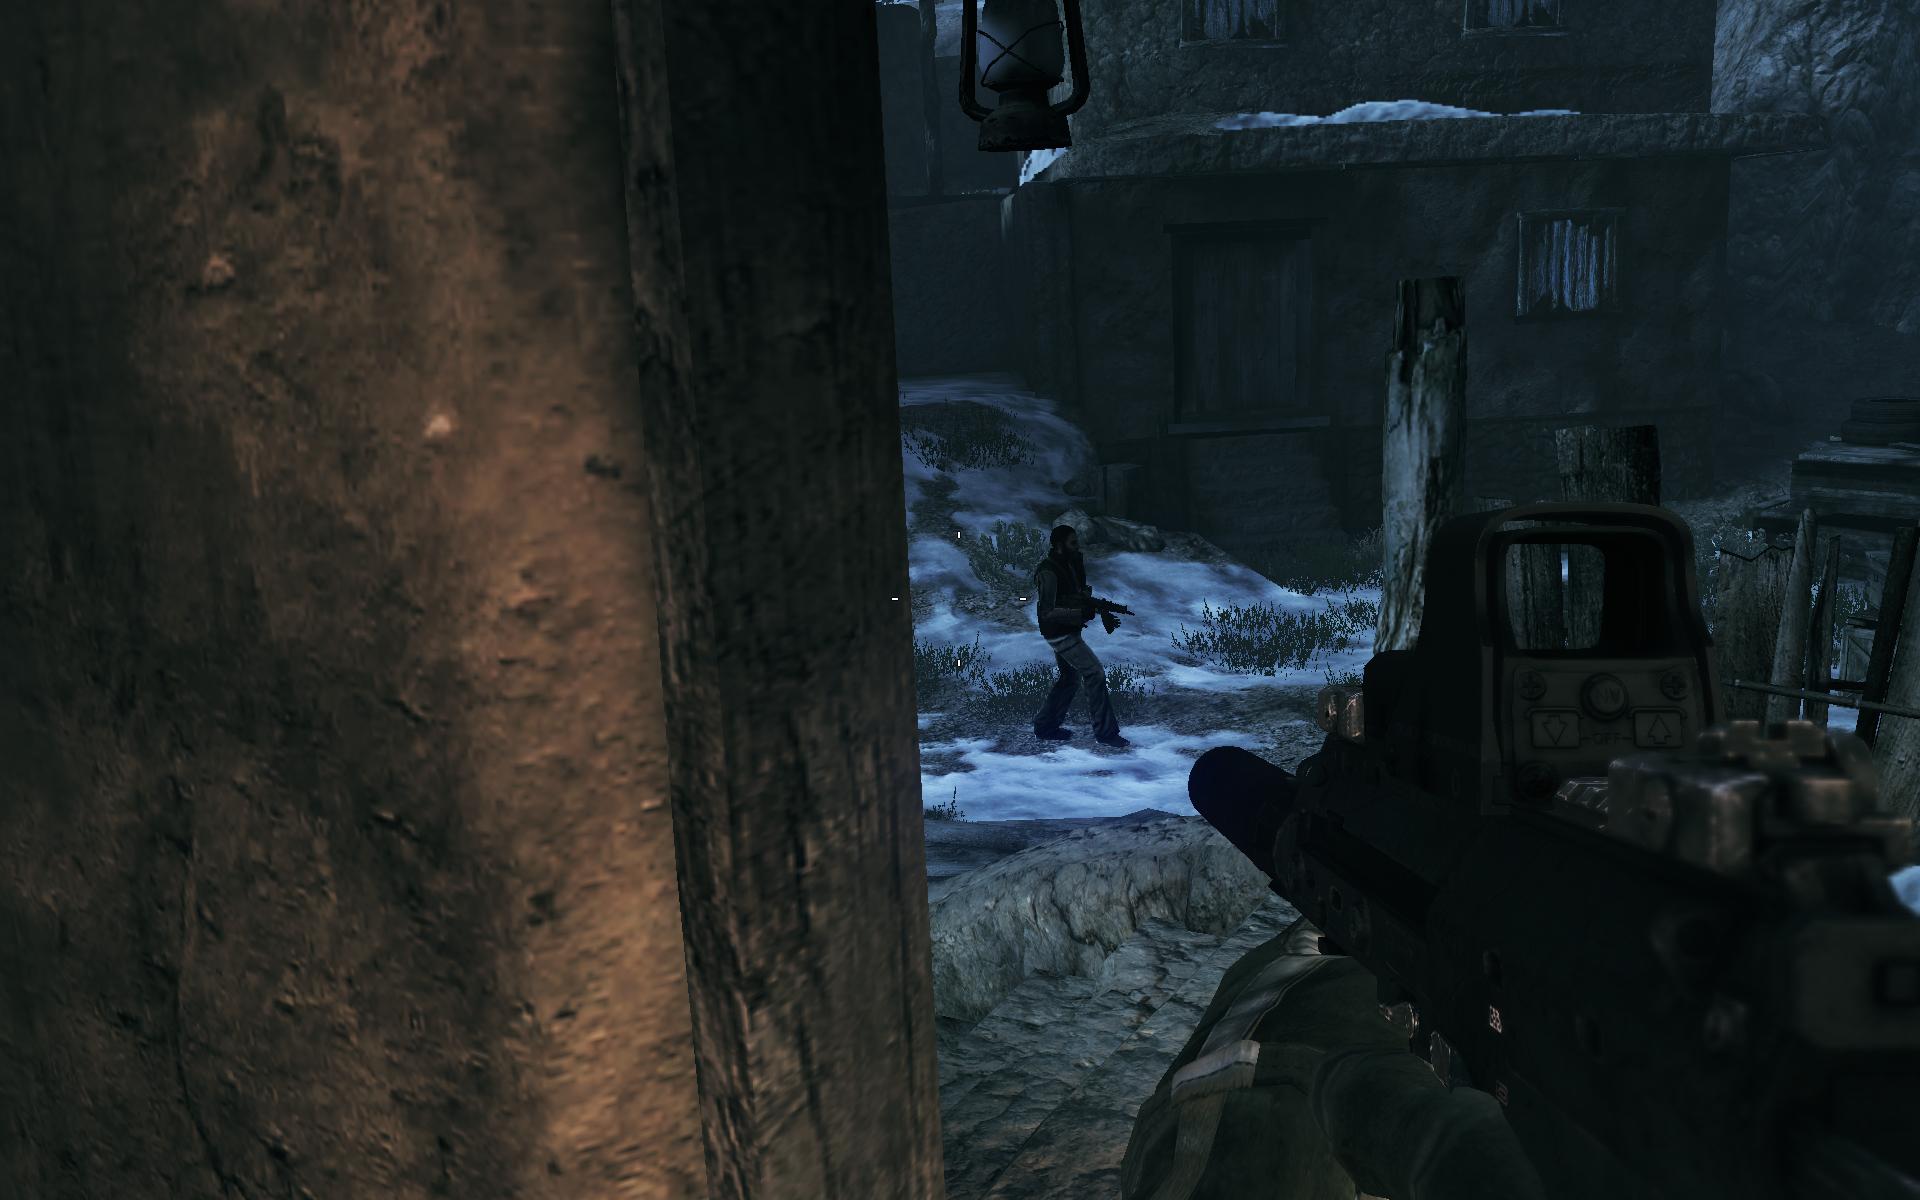 an image of the scene in a game with a gun and snow